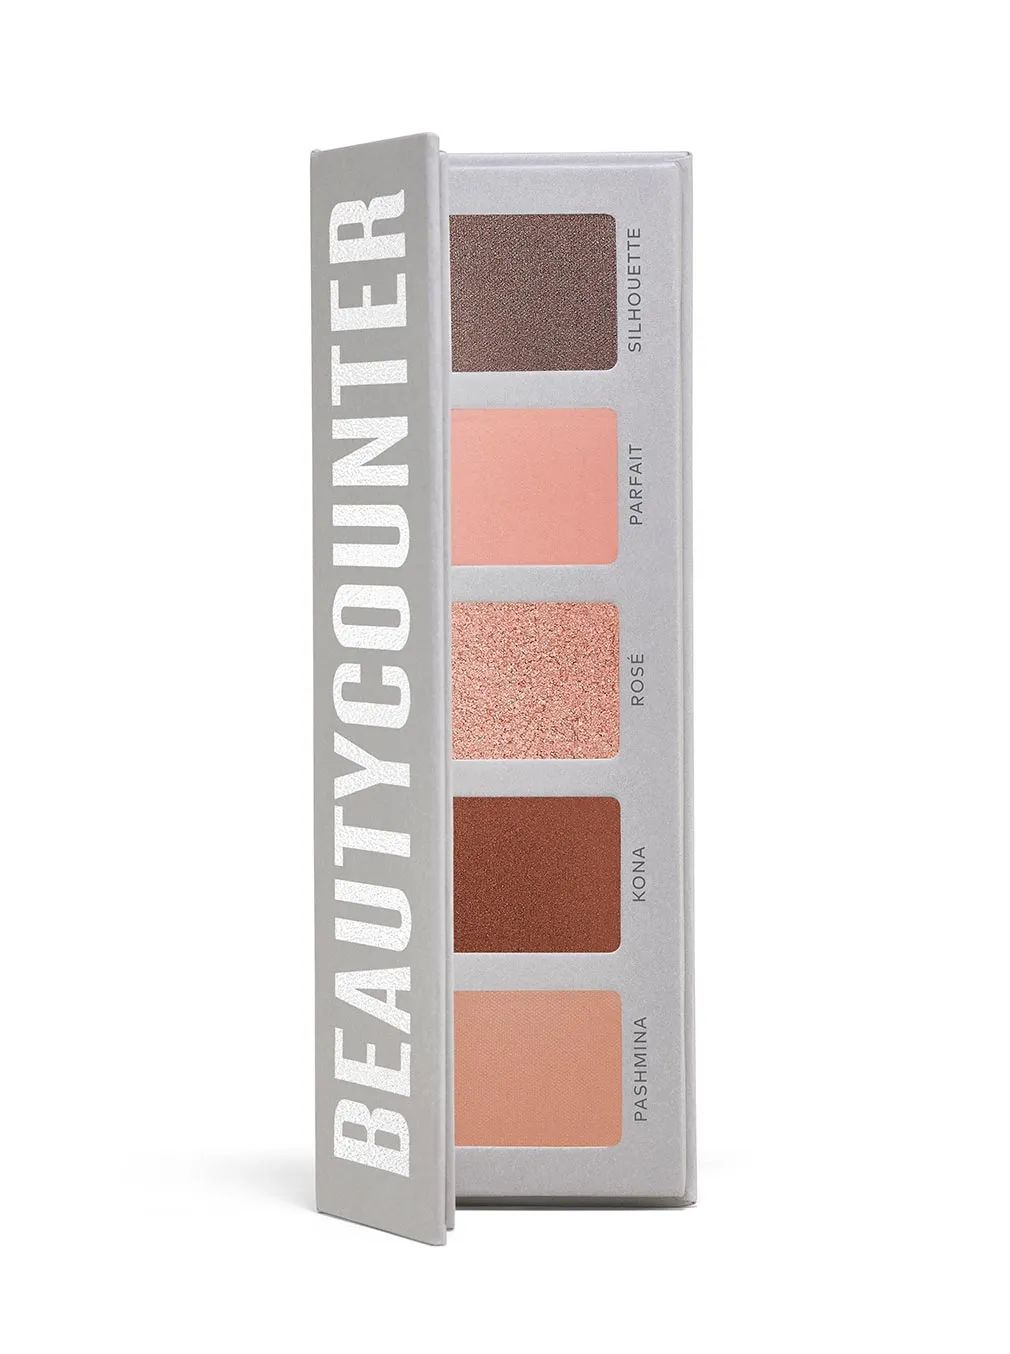 Essentials Eye Palette - Beautycounter - Skin Care, Makeup, Bath and Body and more! | Beautycounter.com